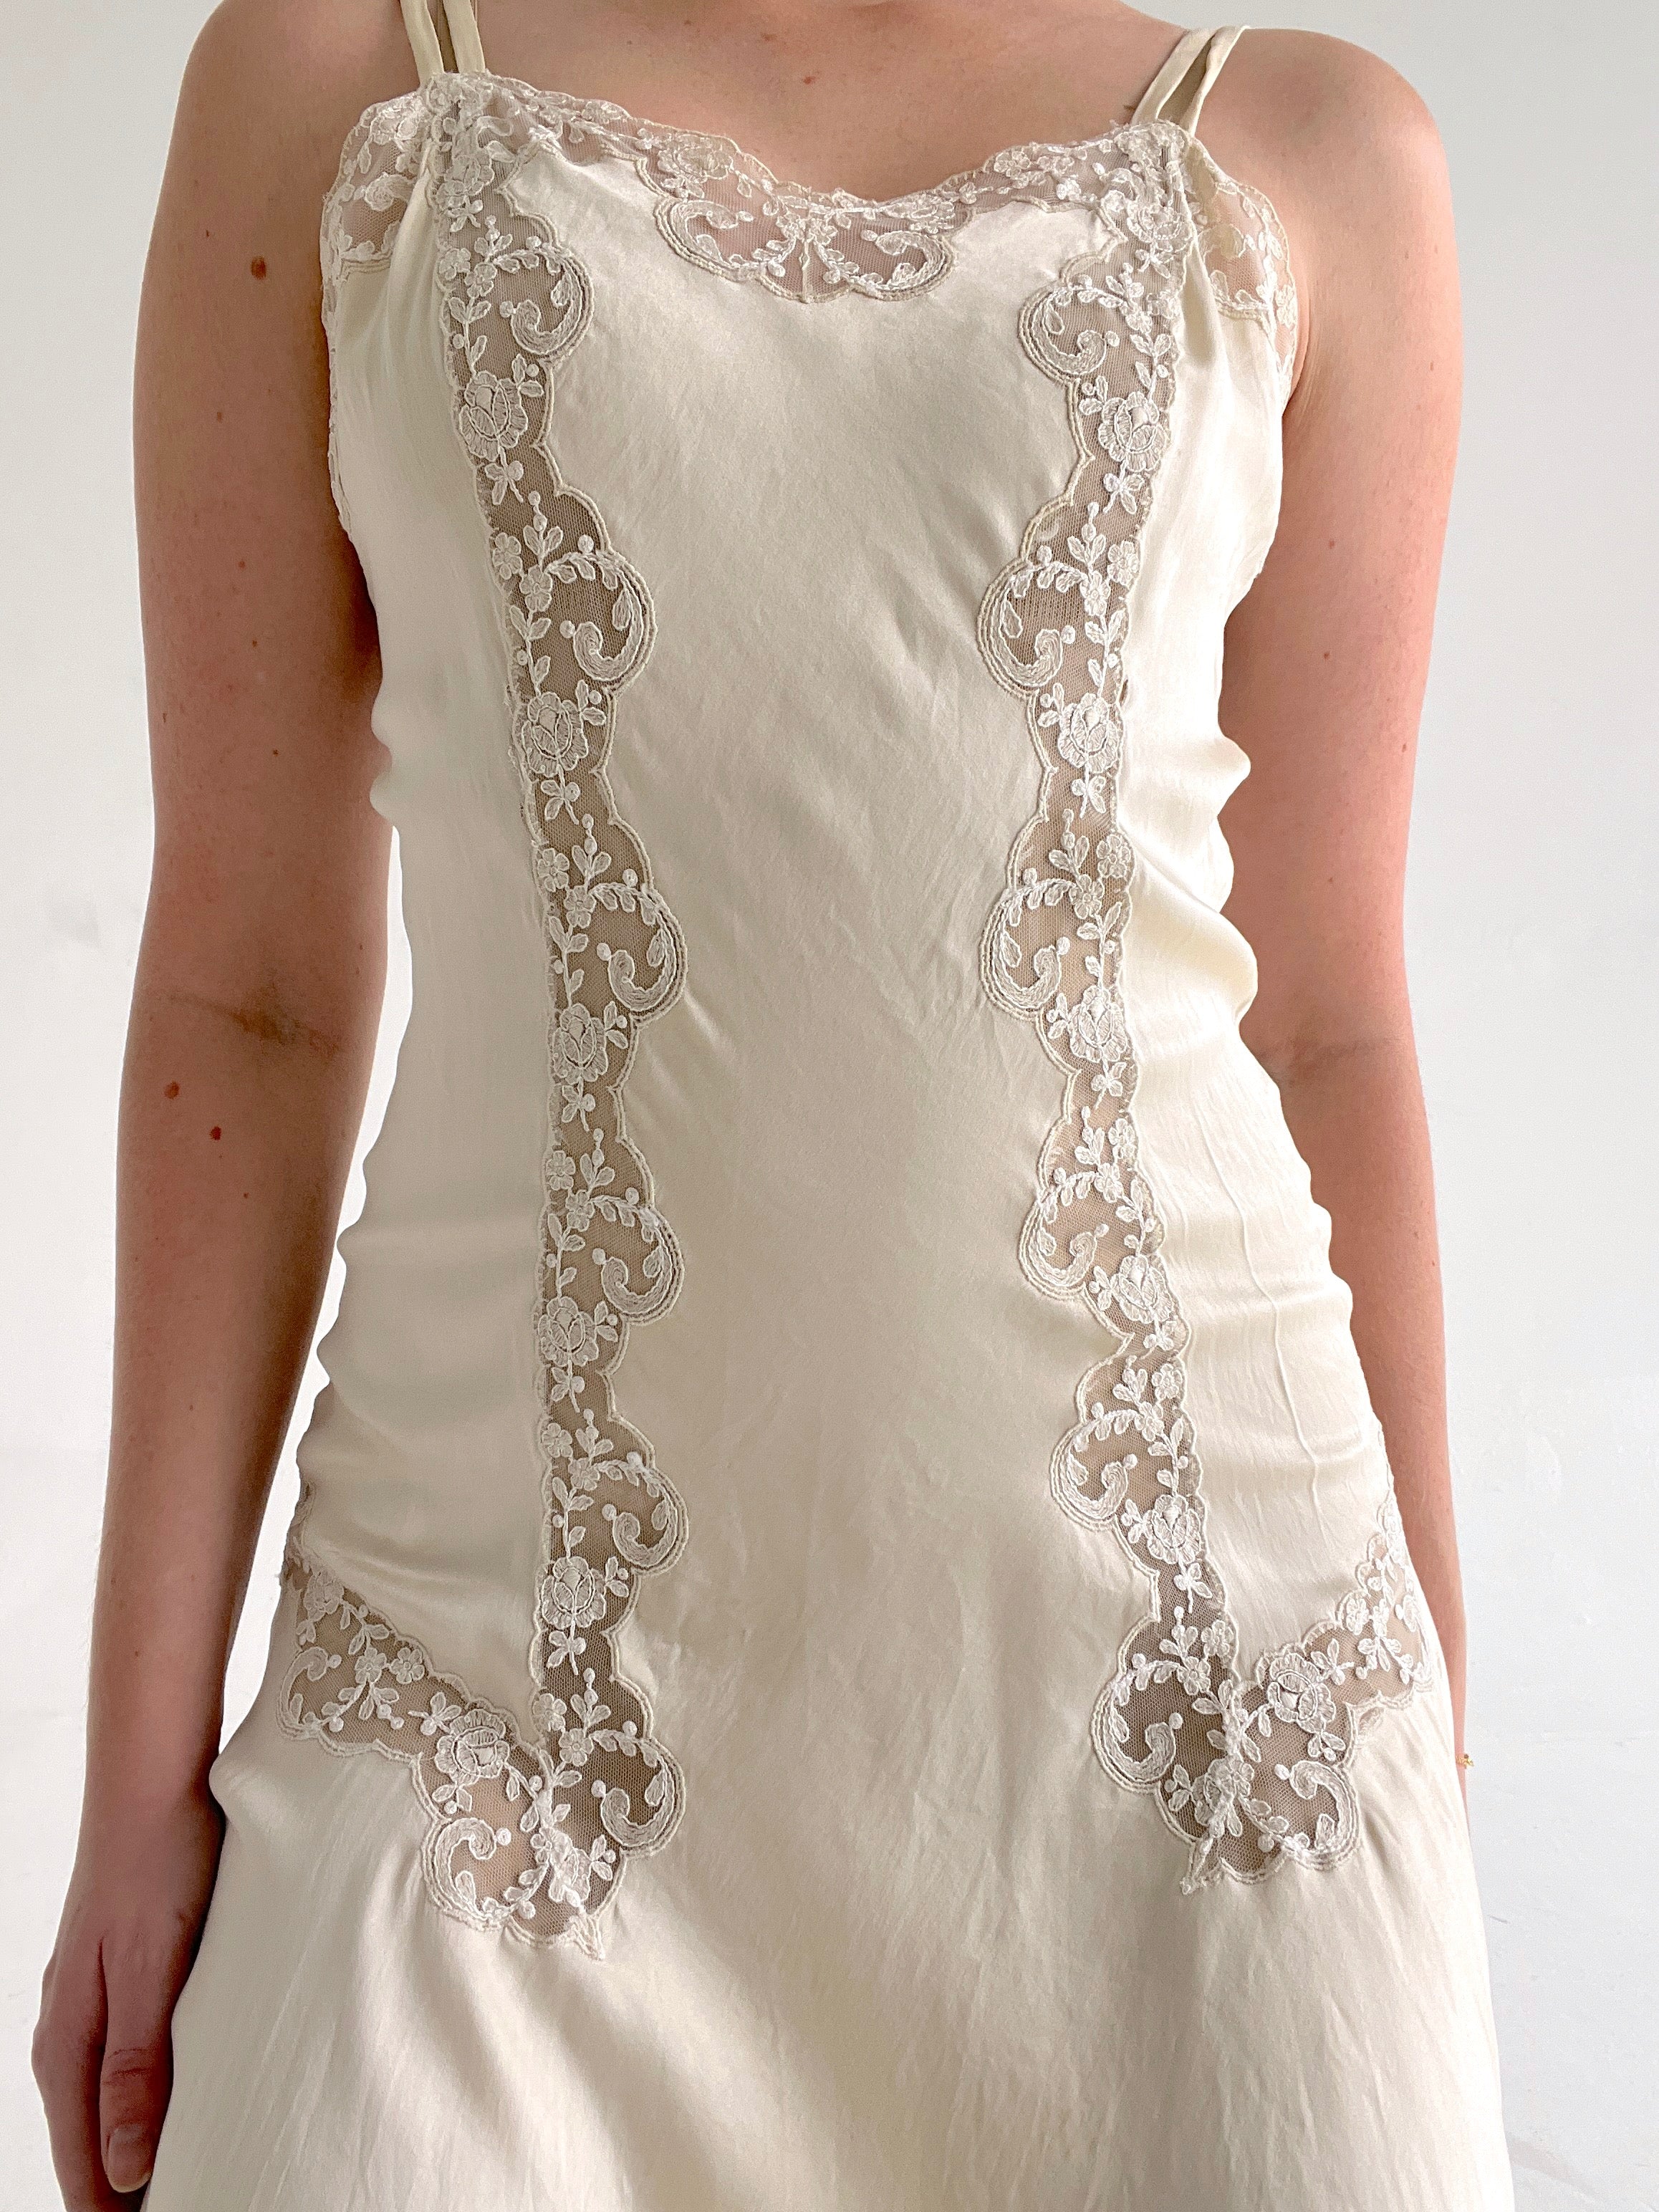 1930's Cream Silk Dress with White Lace Inserts